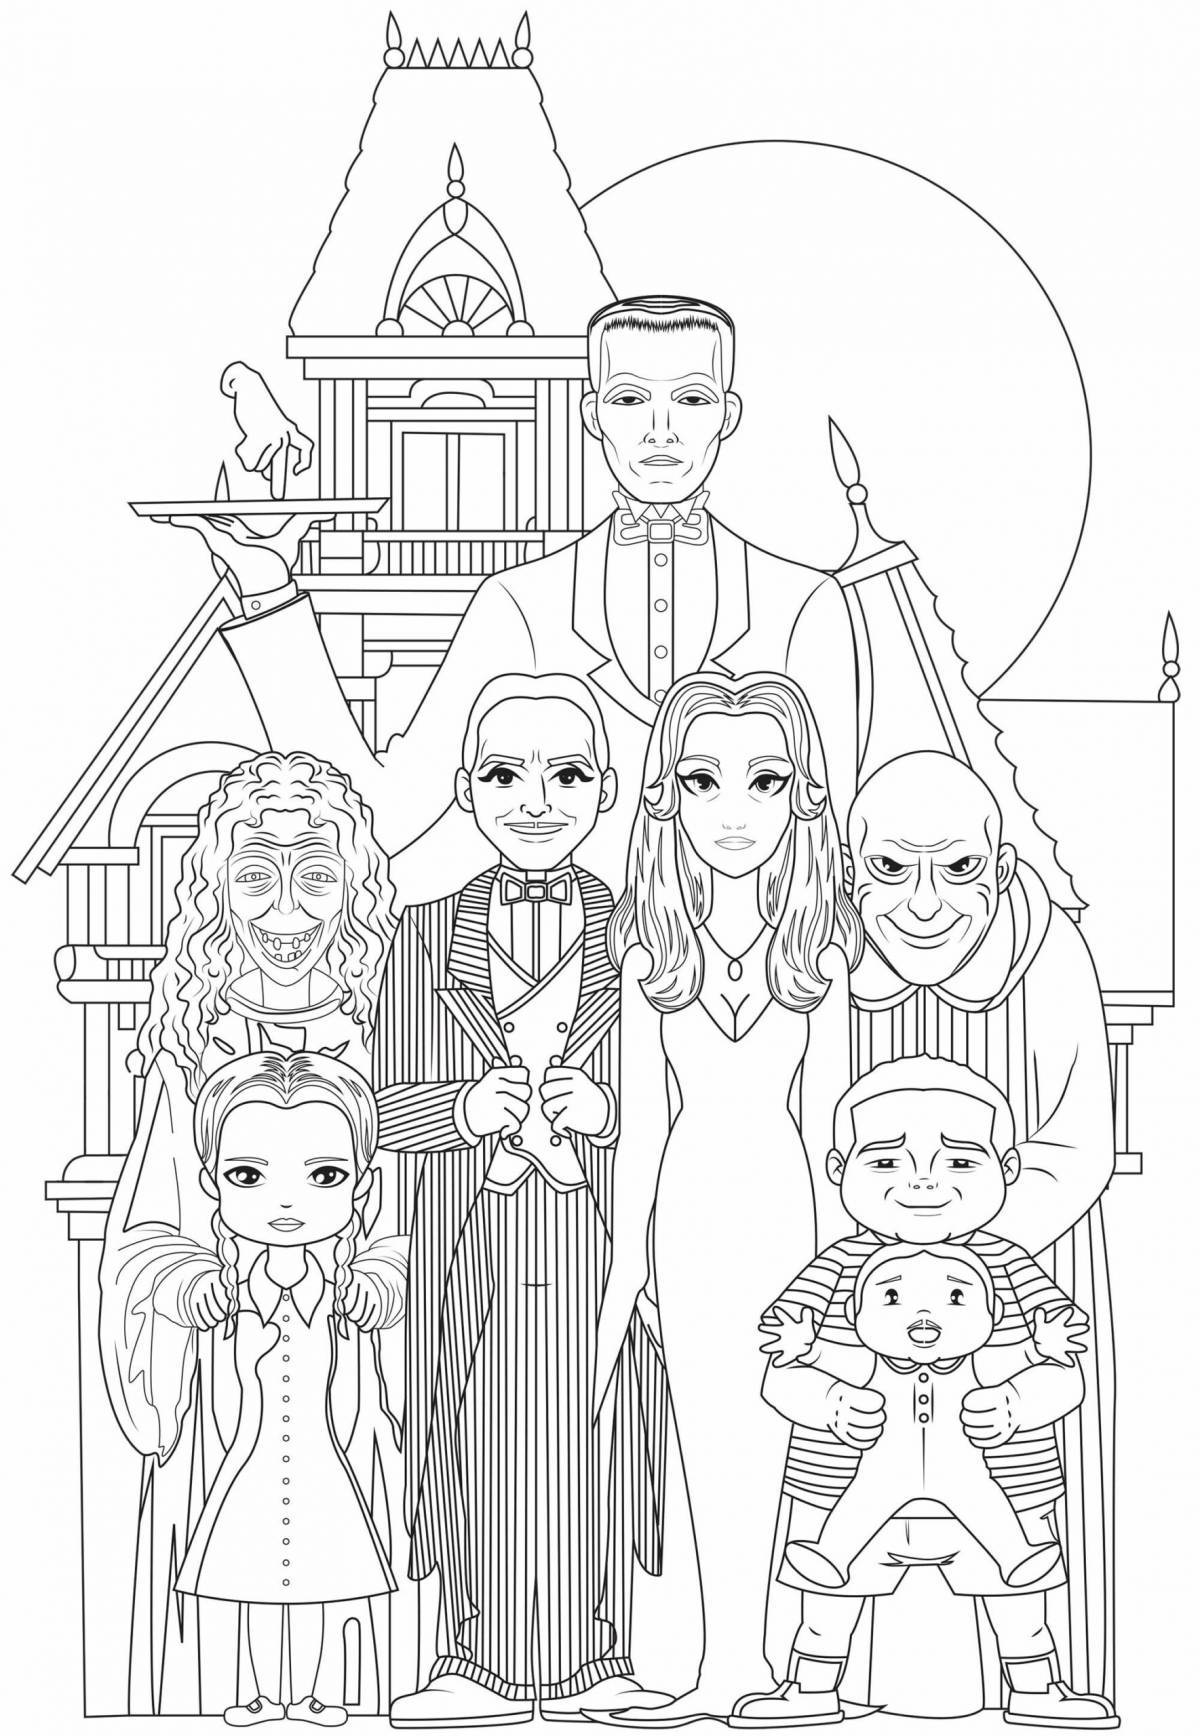 Glittering Addams Family Coloring Page